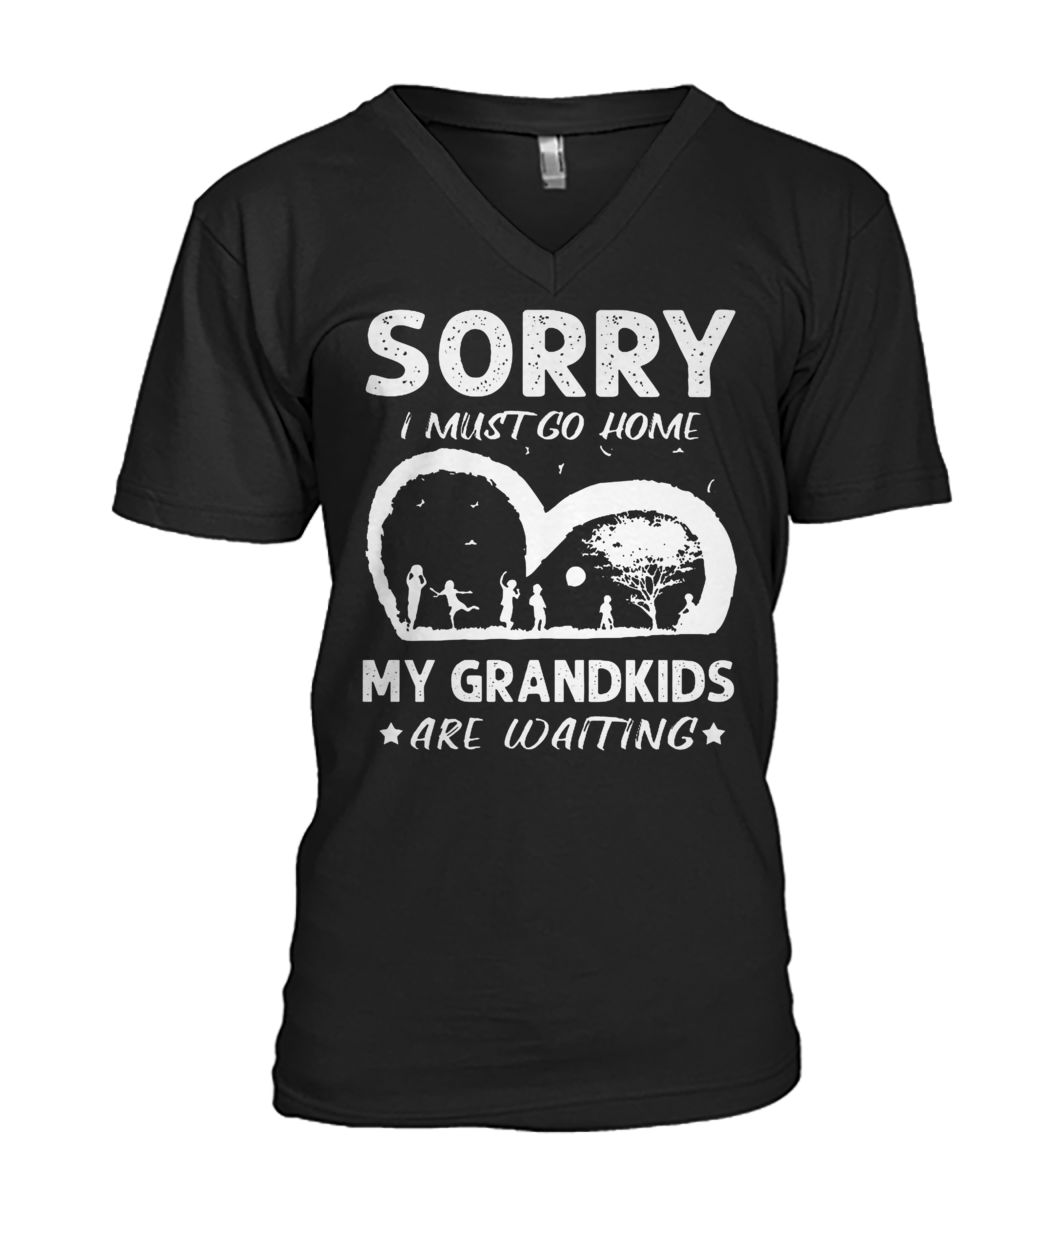 Sorry I must go home my grandkids are waiting mens v-neck